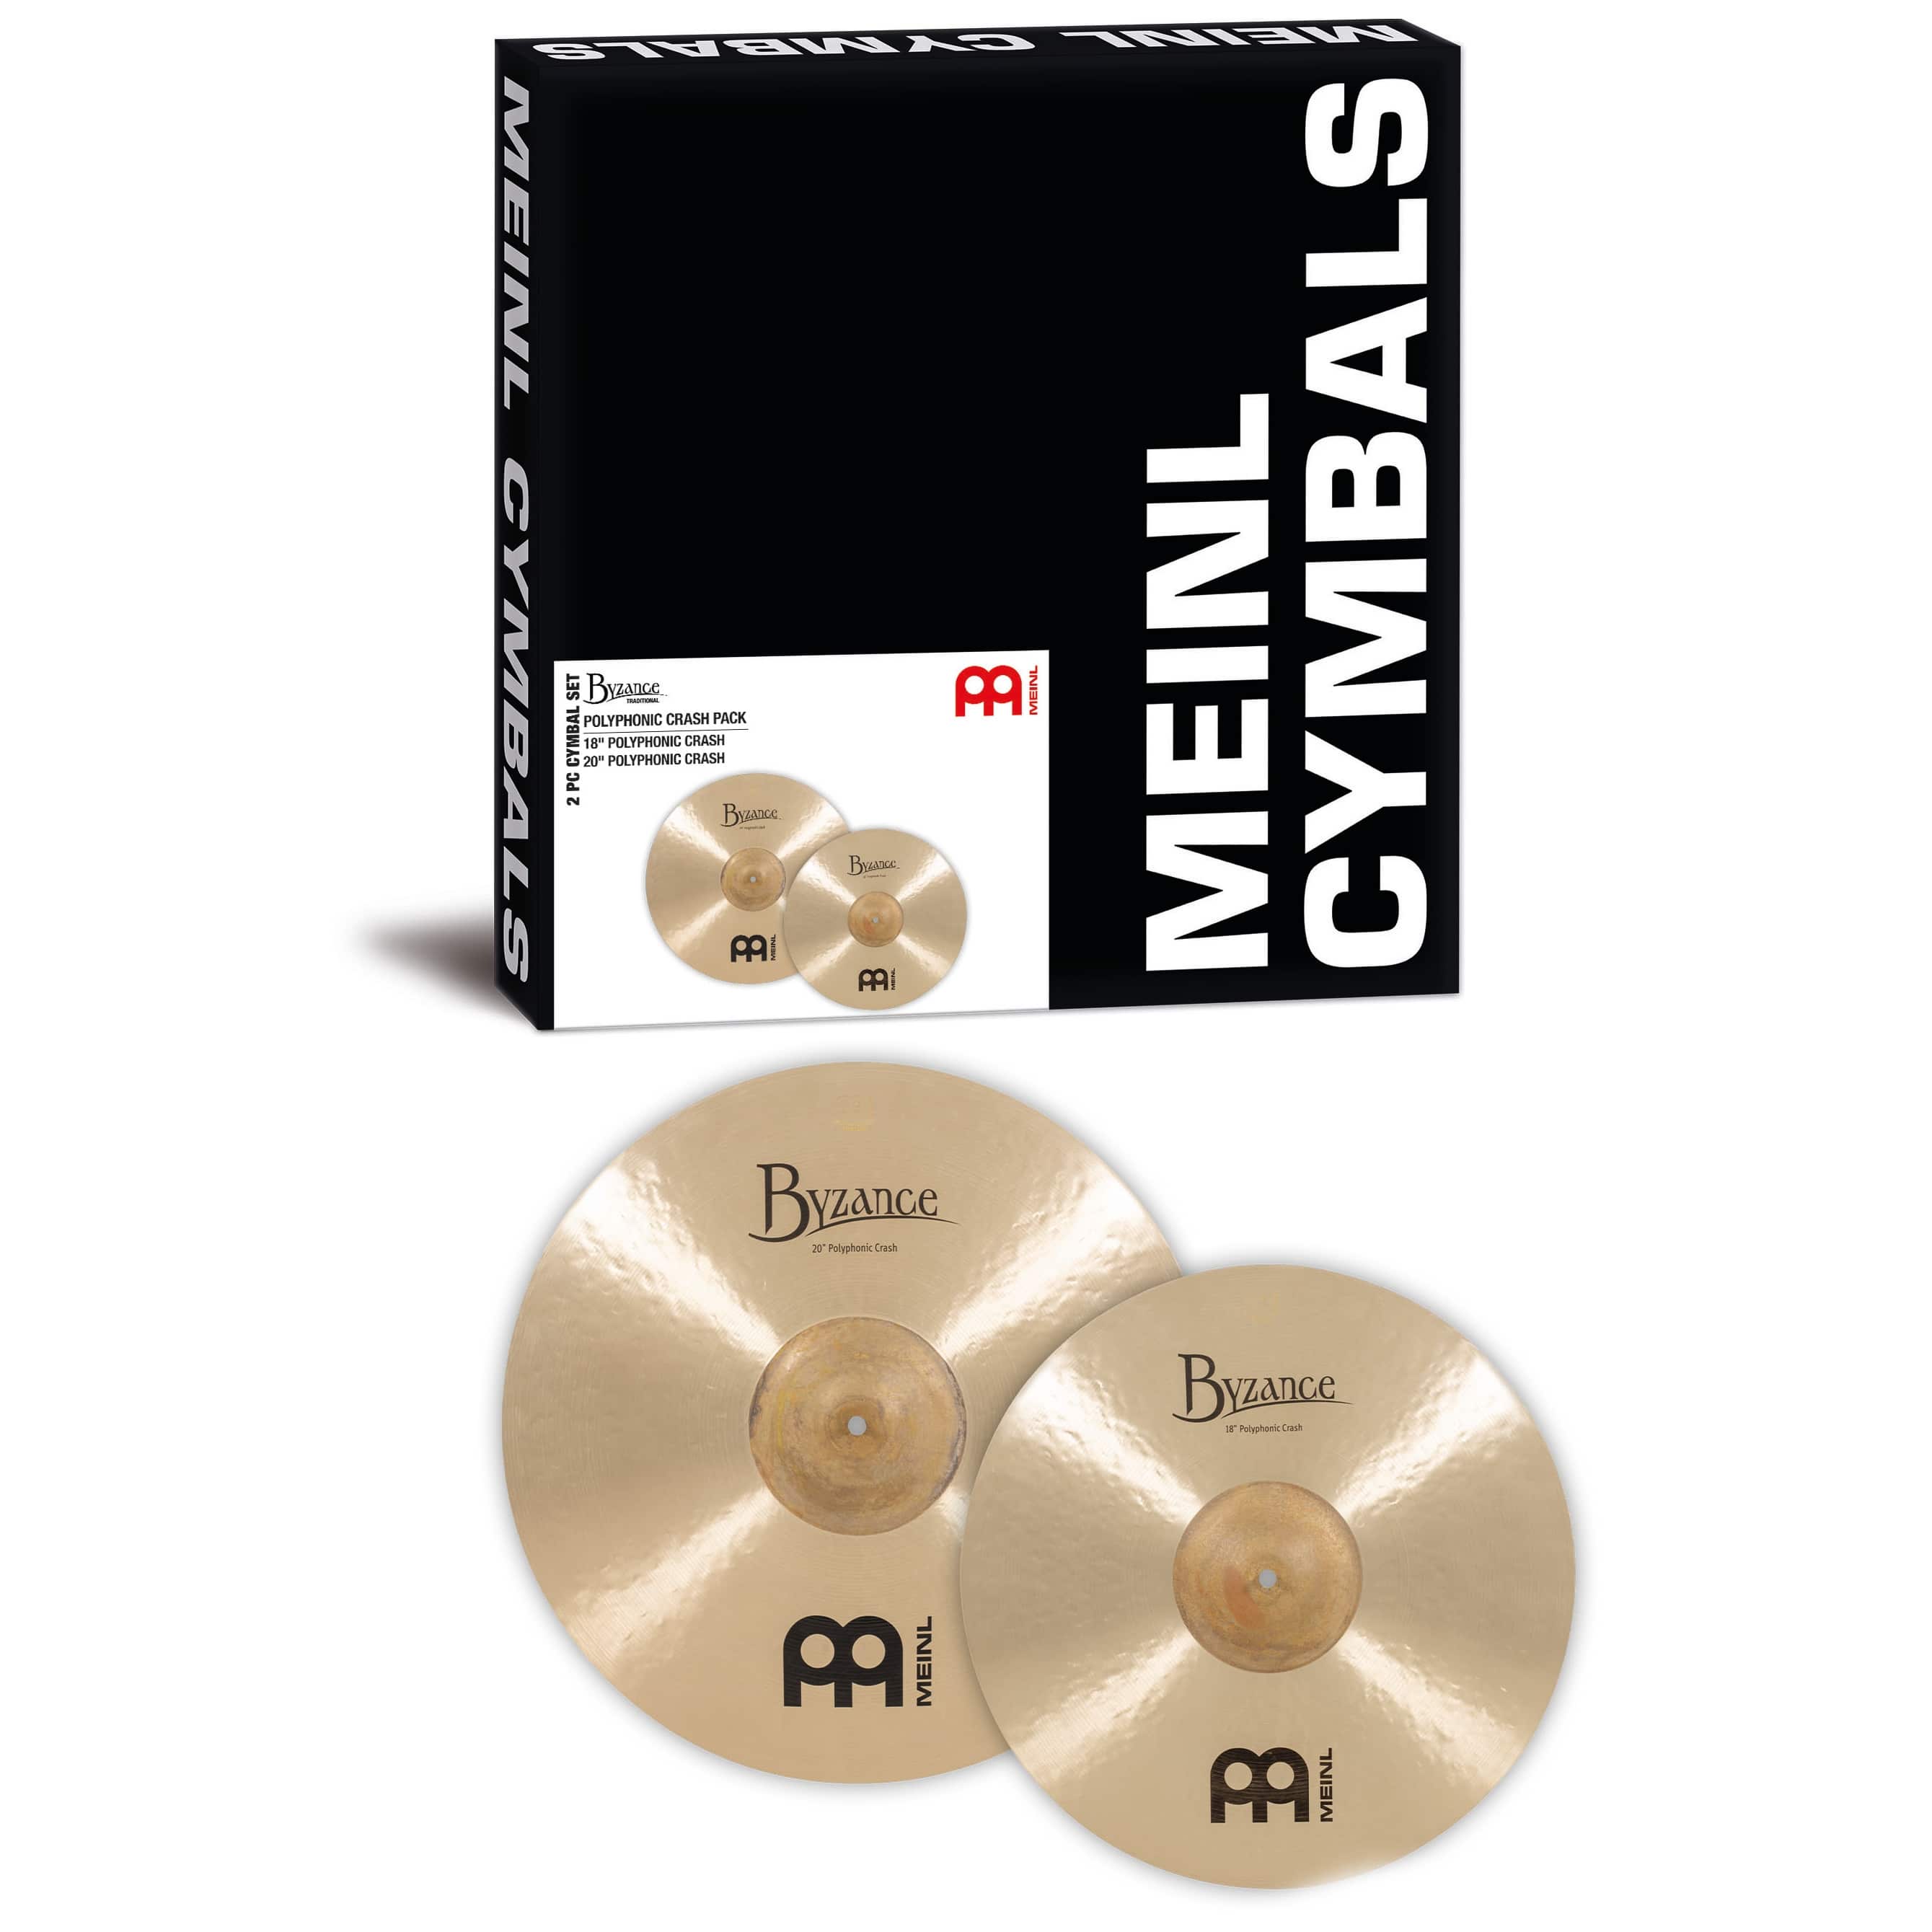 Meinl Cymbals BMAT3 - Byzance Traditional Crash Pack